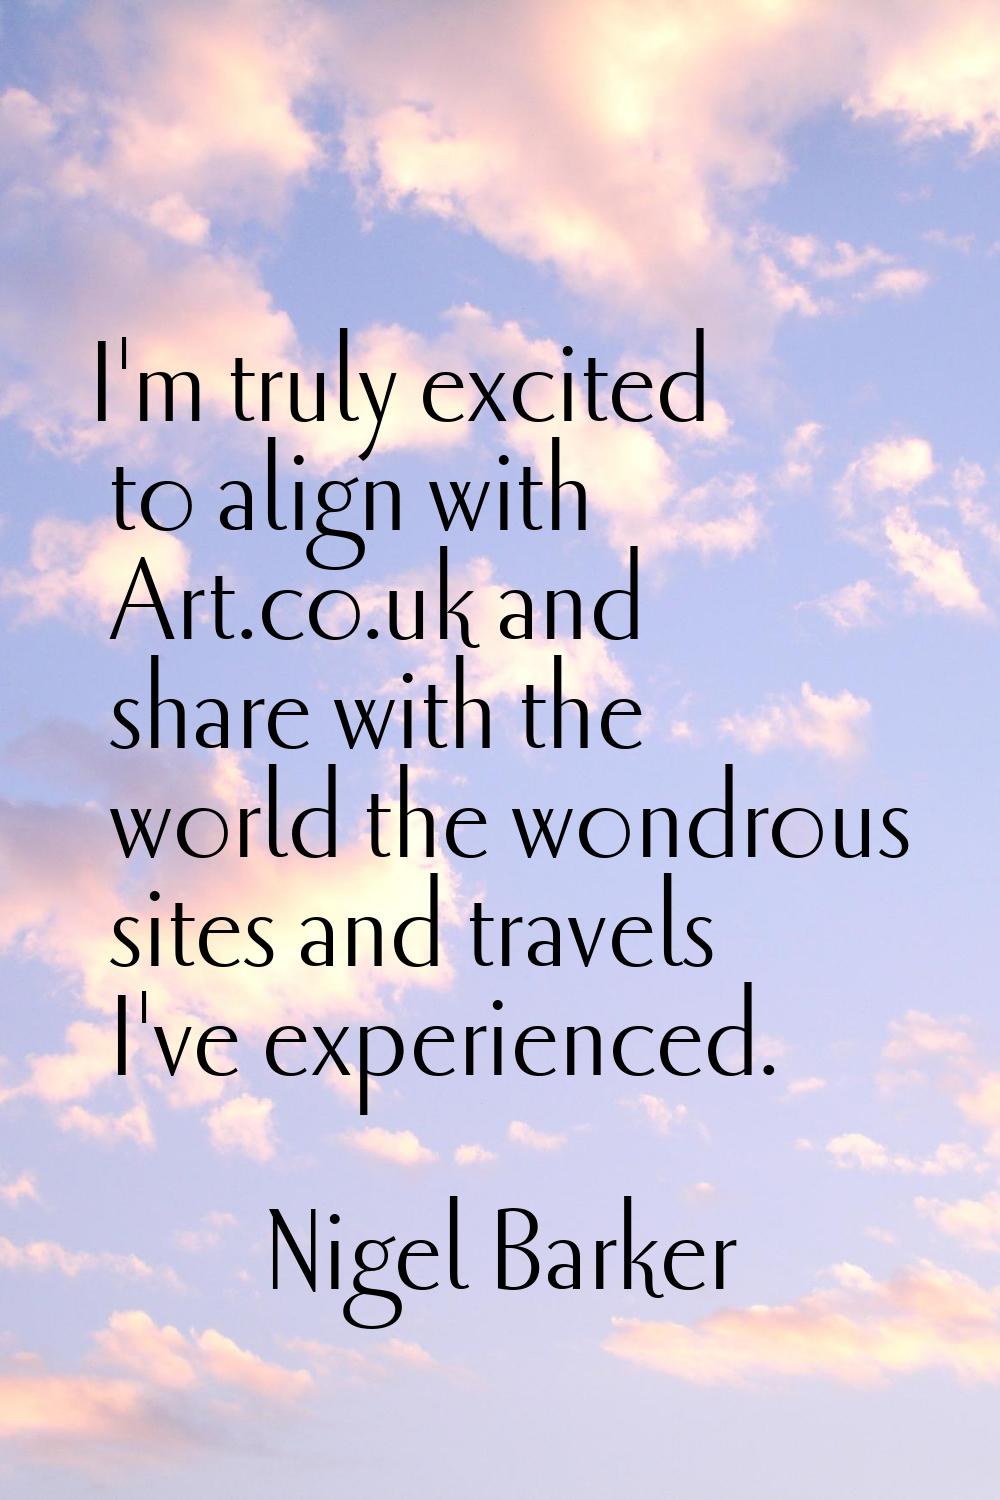 I'm truly excited to align with Art.co.uk and share with the world the wondrous sites and travels I